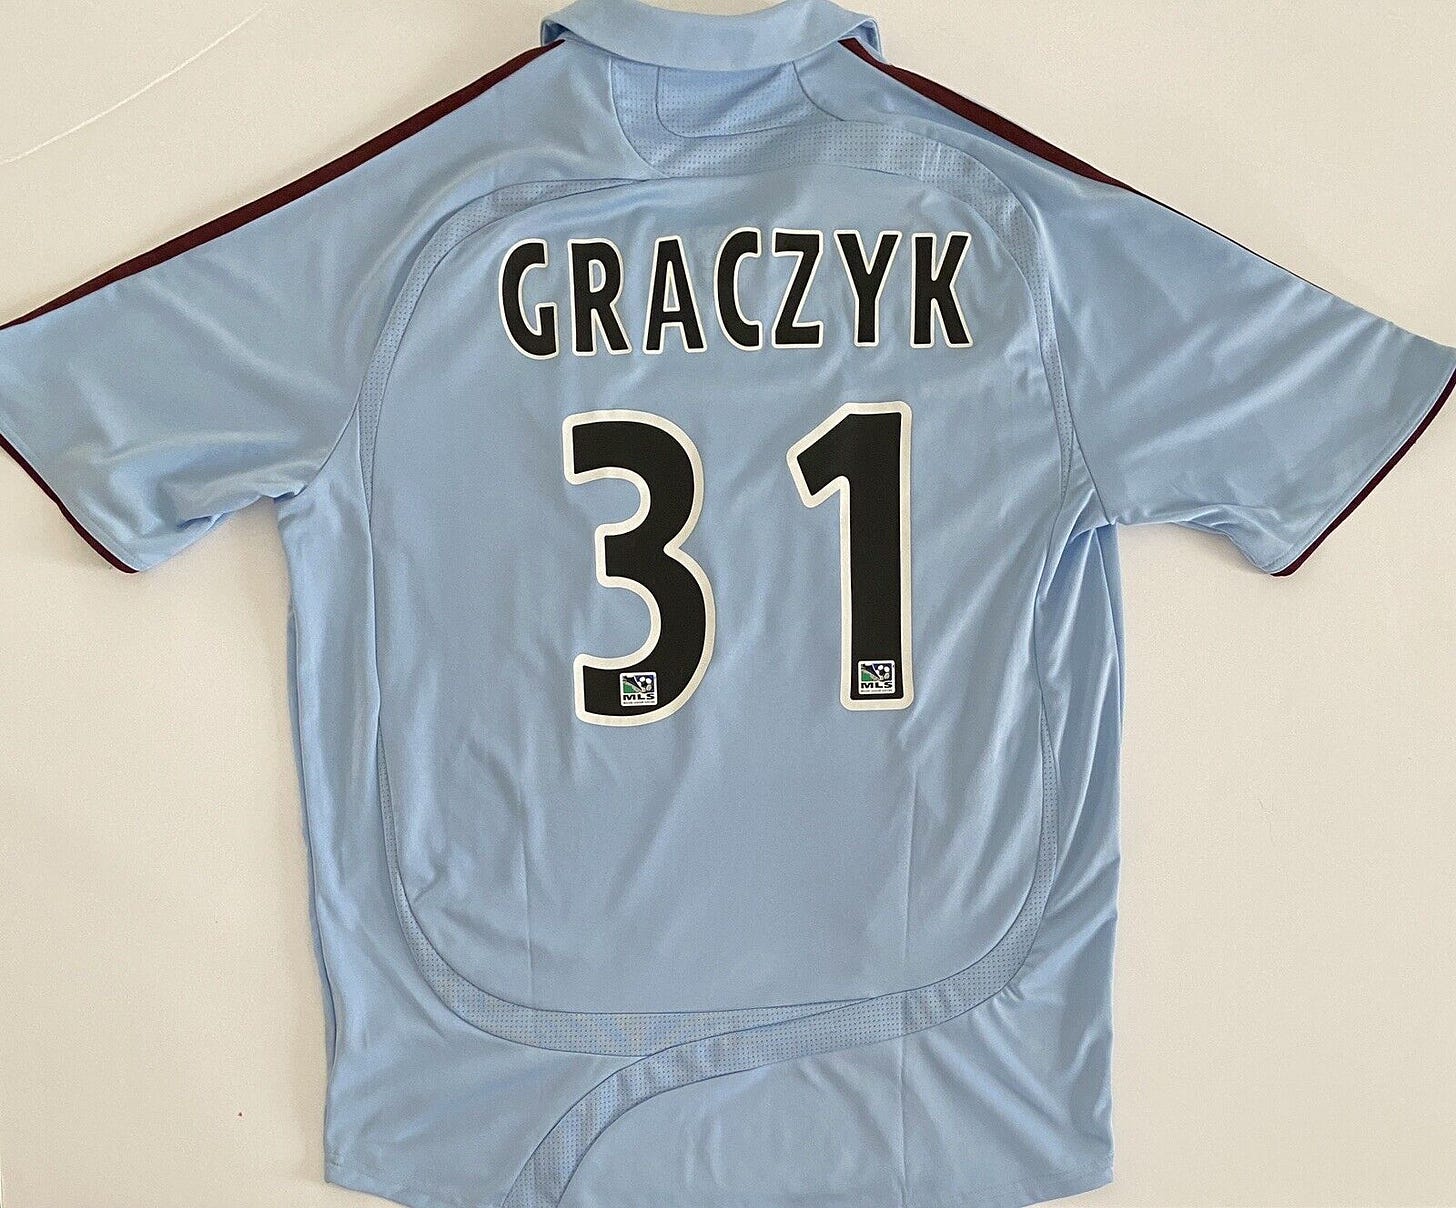 This is NOT the mythical New Mexico United Mike Graczyk kit, but is a very cool 2008 Colorado Rapids kit that is available on eBay now! Happy bidding!